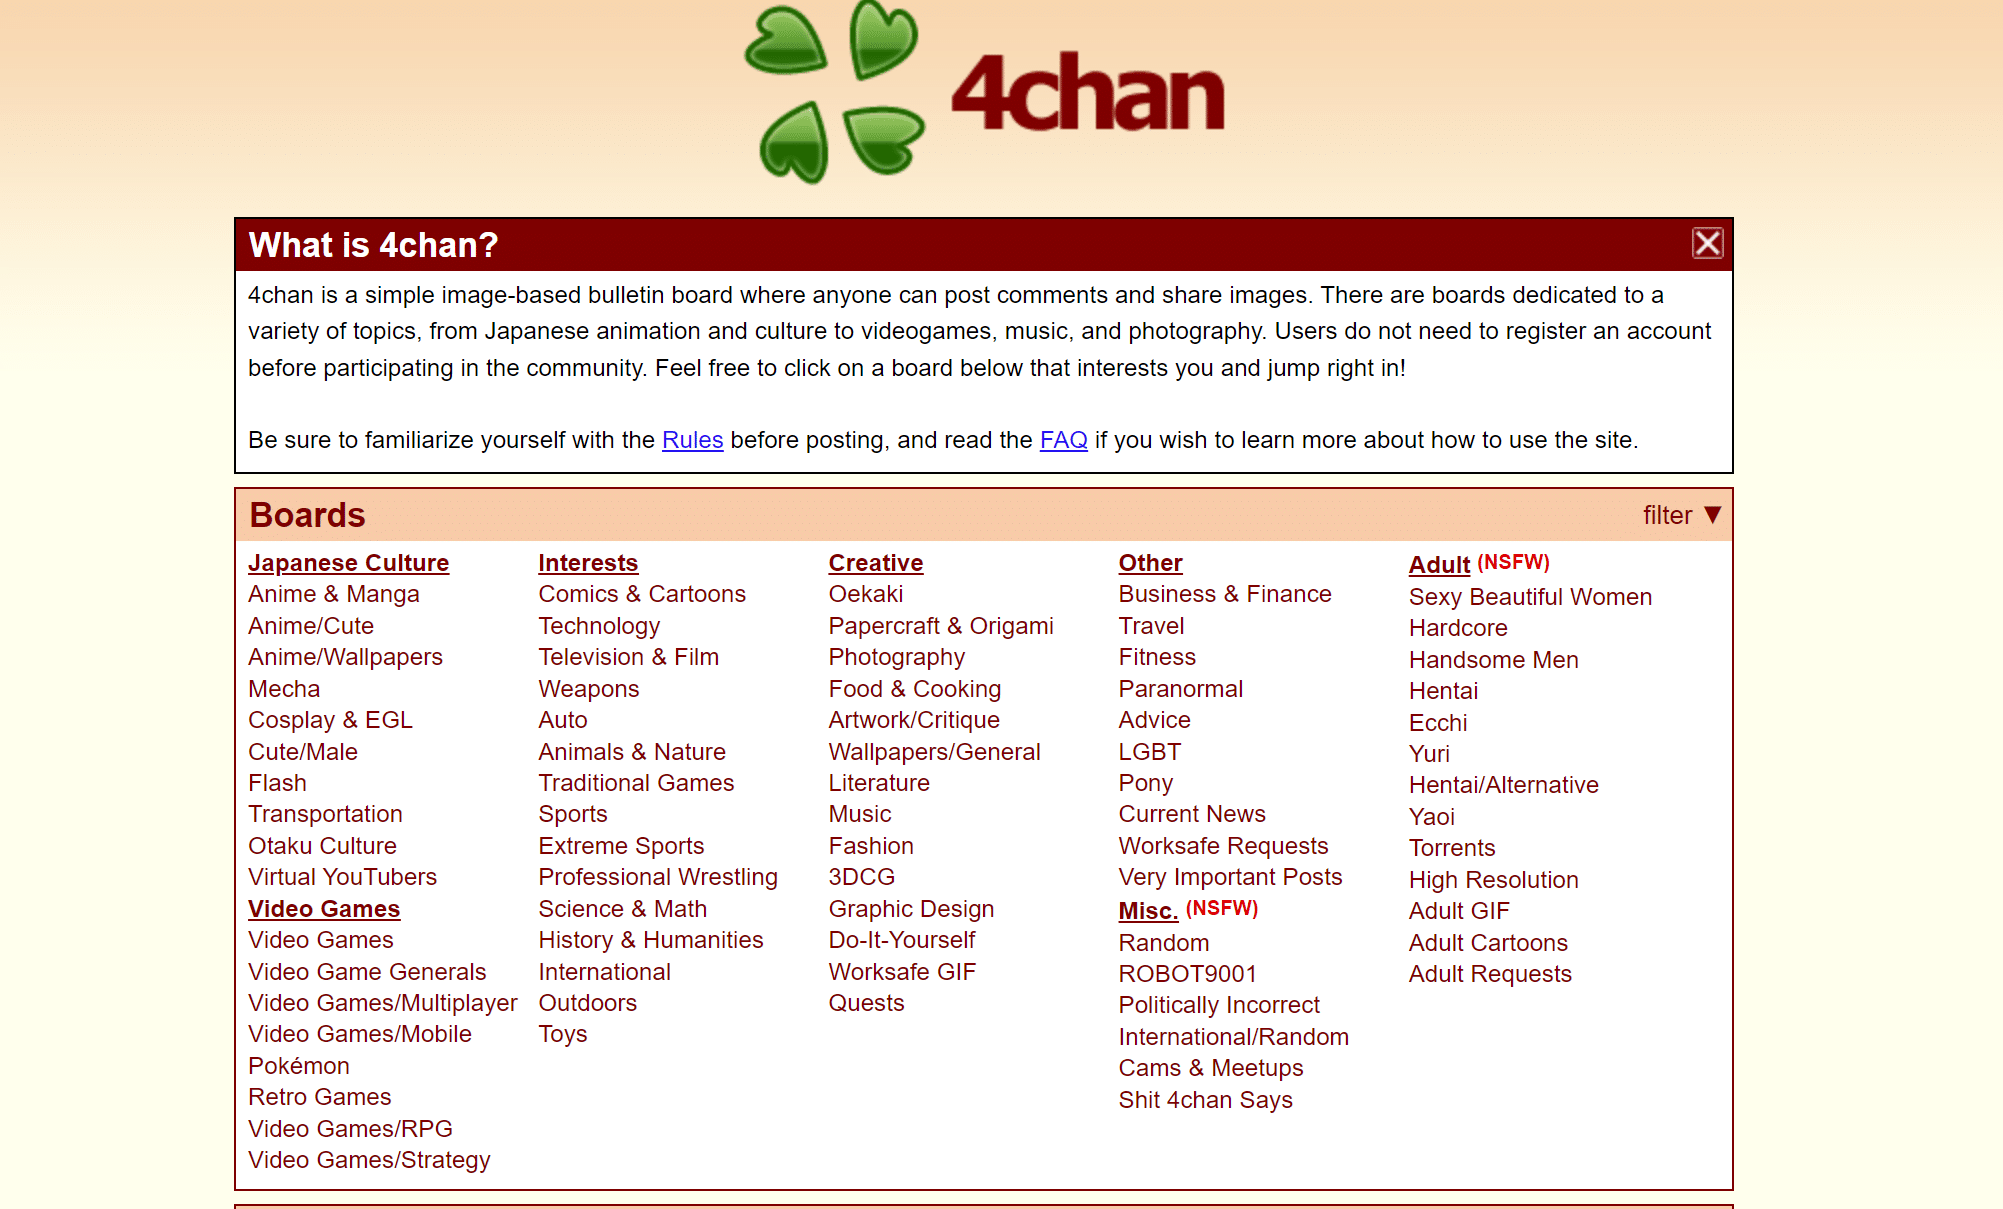 What is 4chan